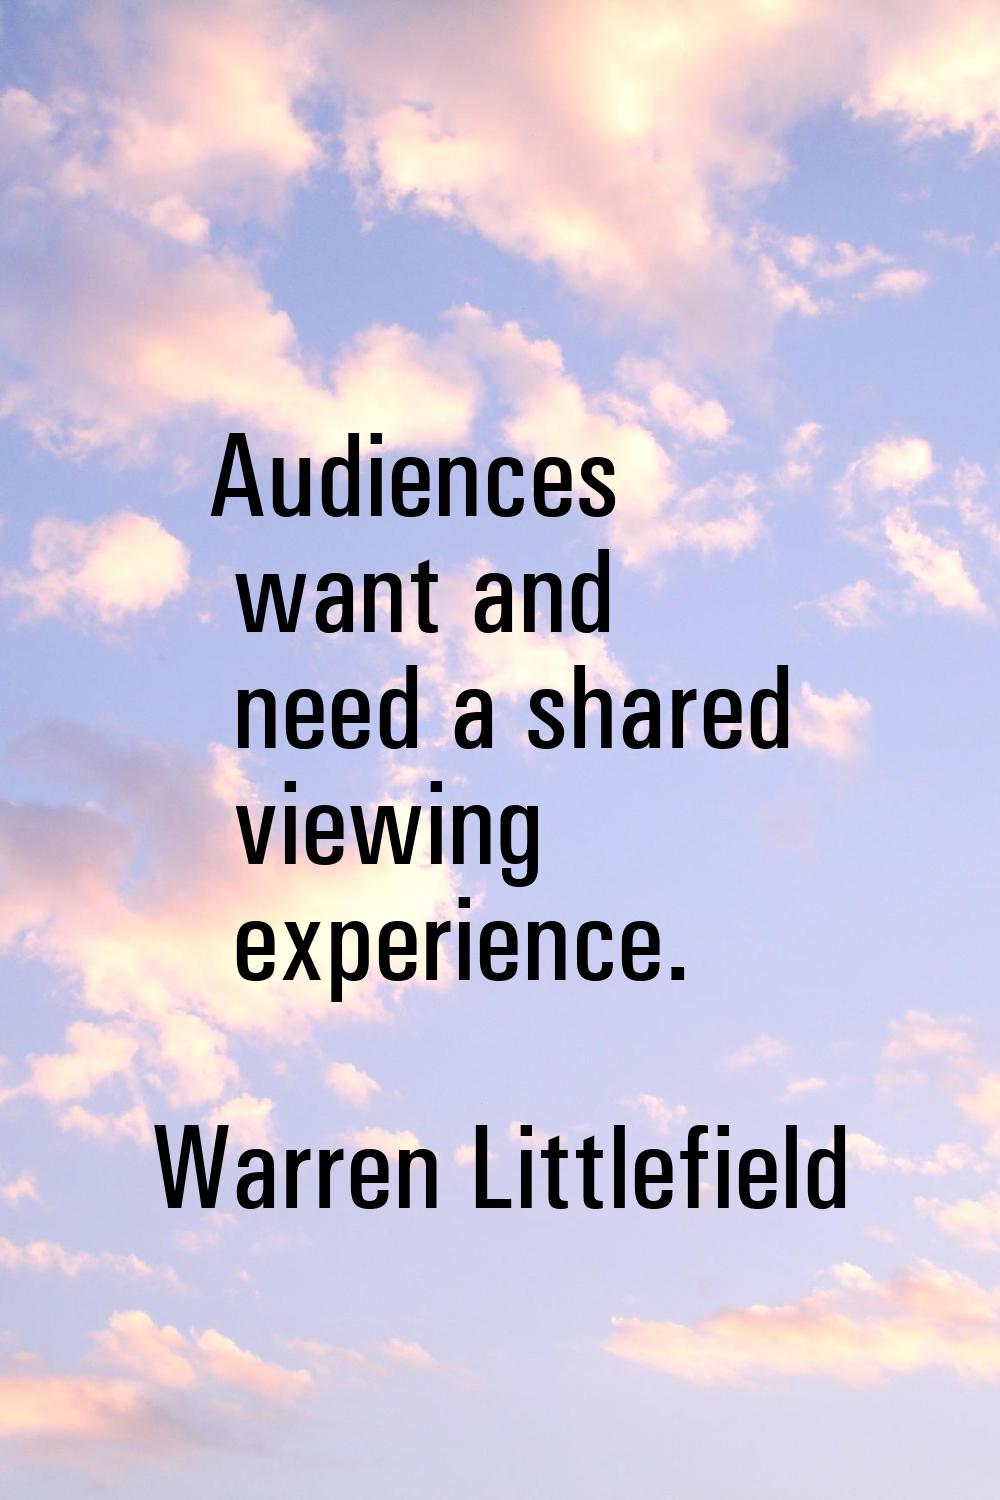 Audiences want and need a shared viewing experience.